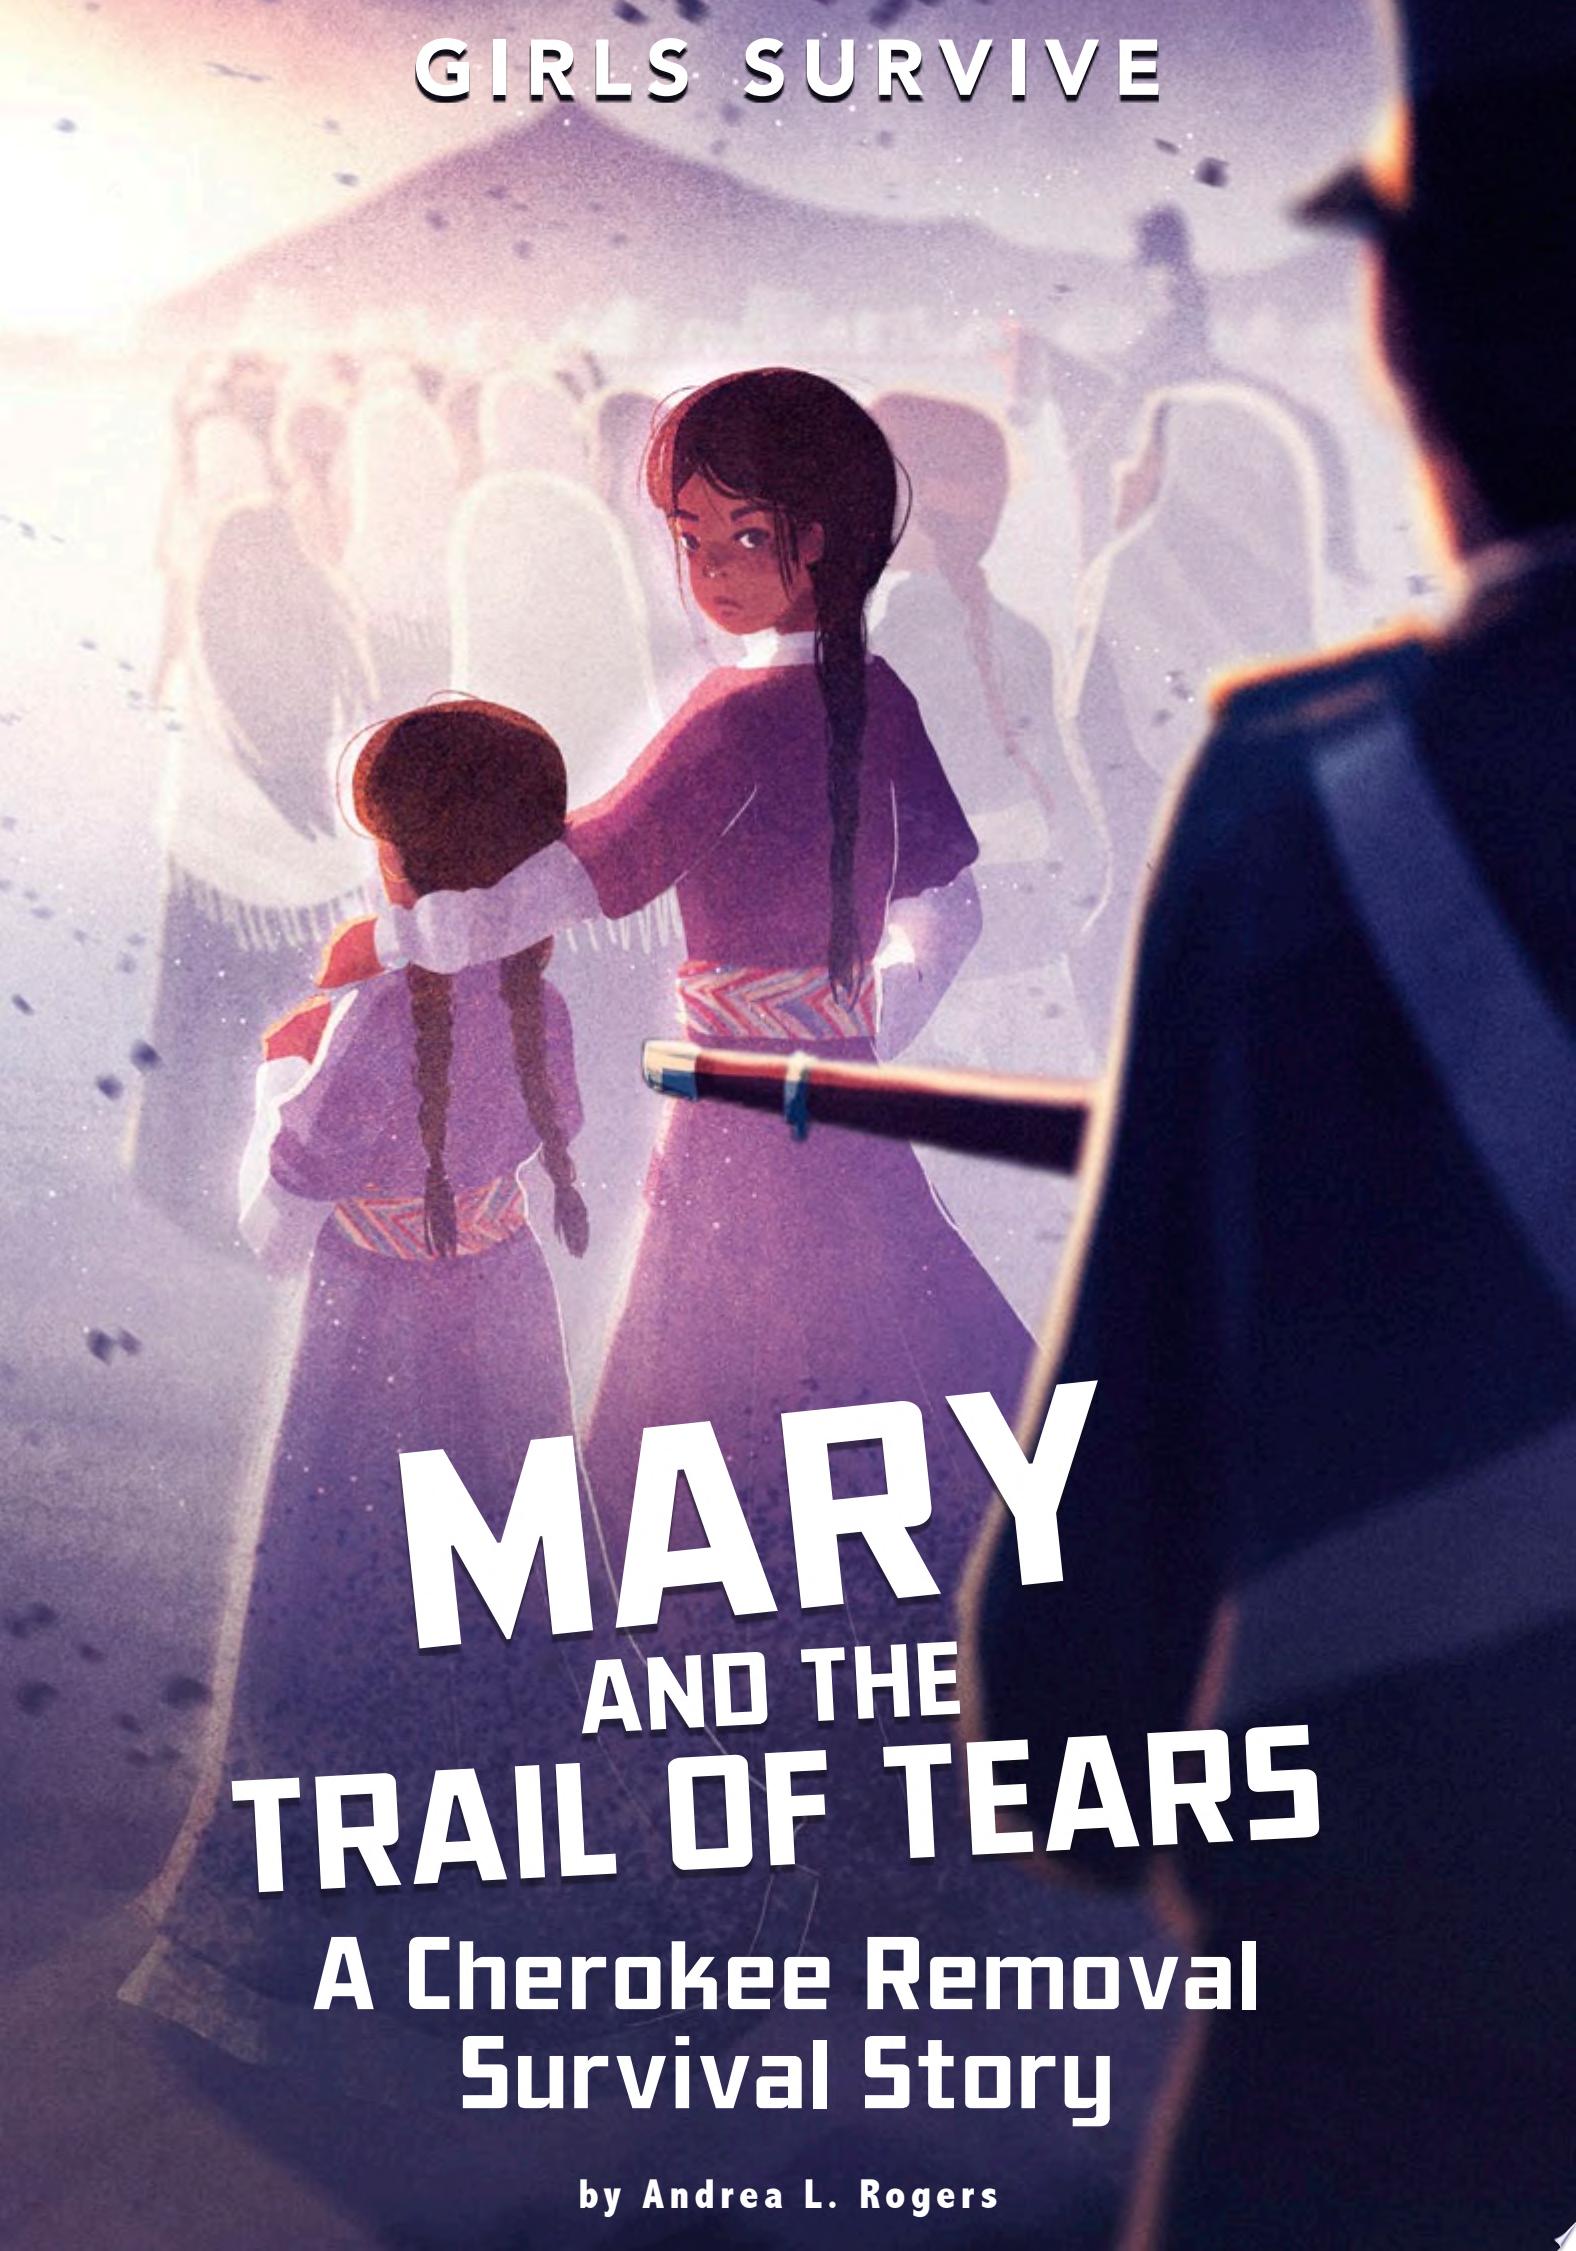 Image for "Mary and the Trail of Tears"